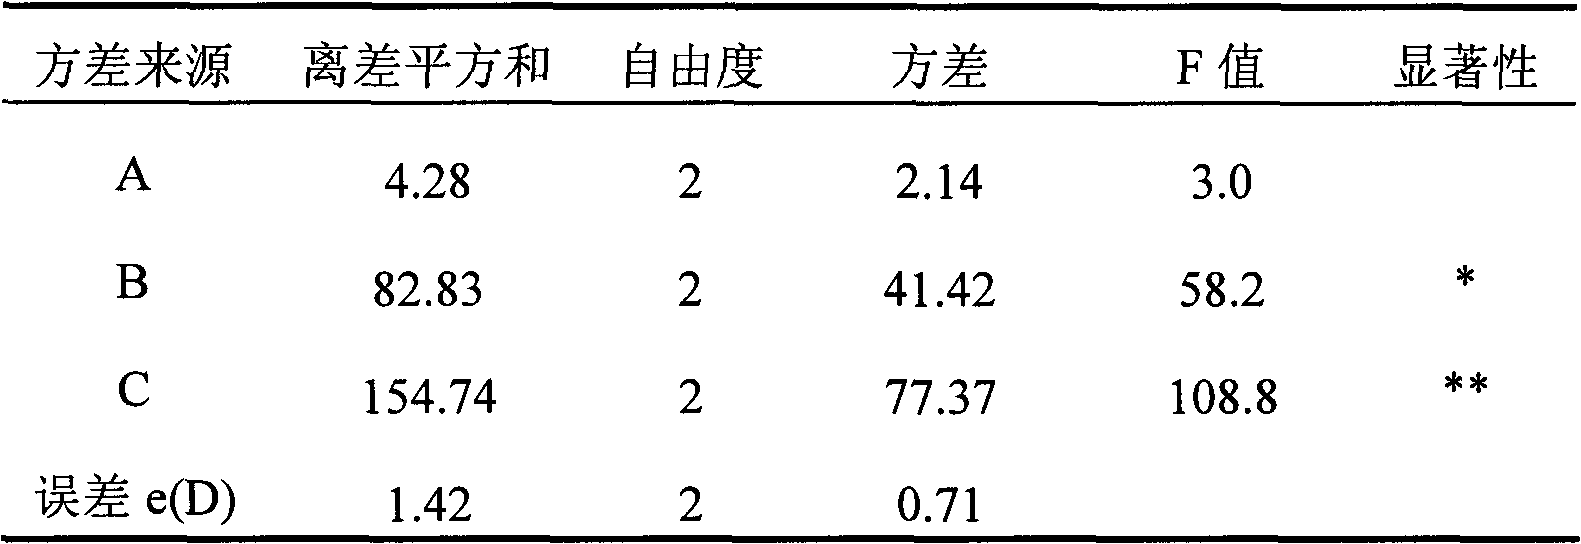 Acute turpinia leaf general flavone ethanol reflux extract, and preparation method and application thereof